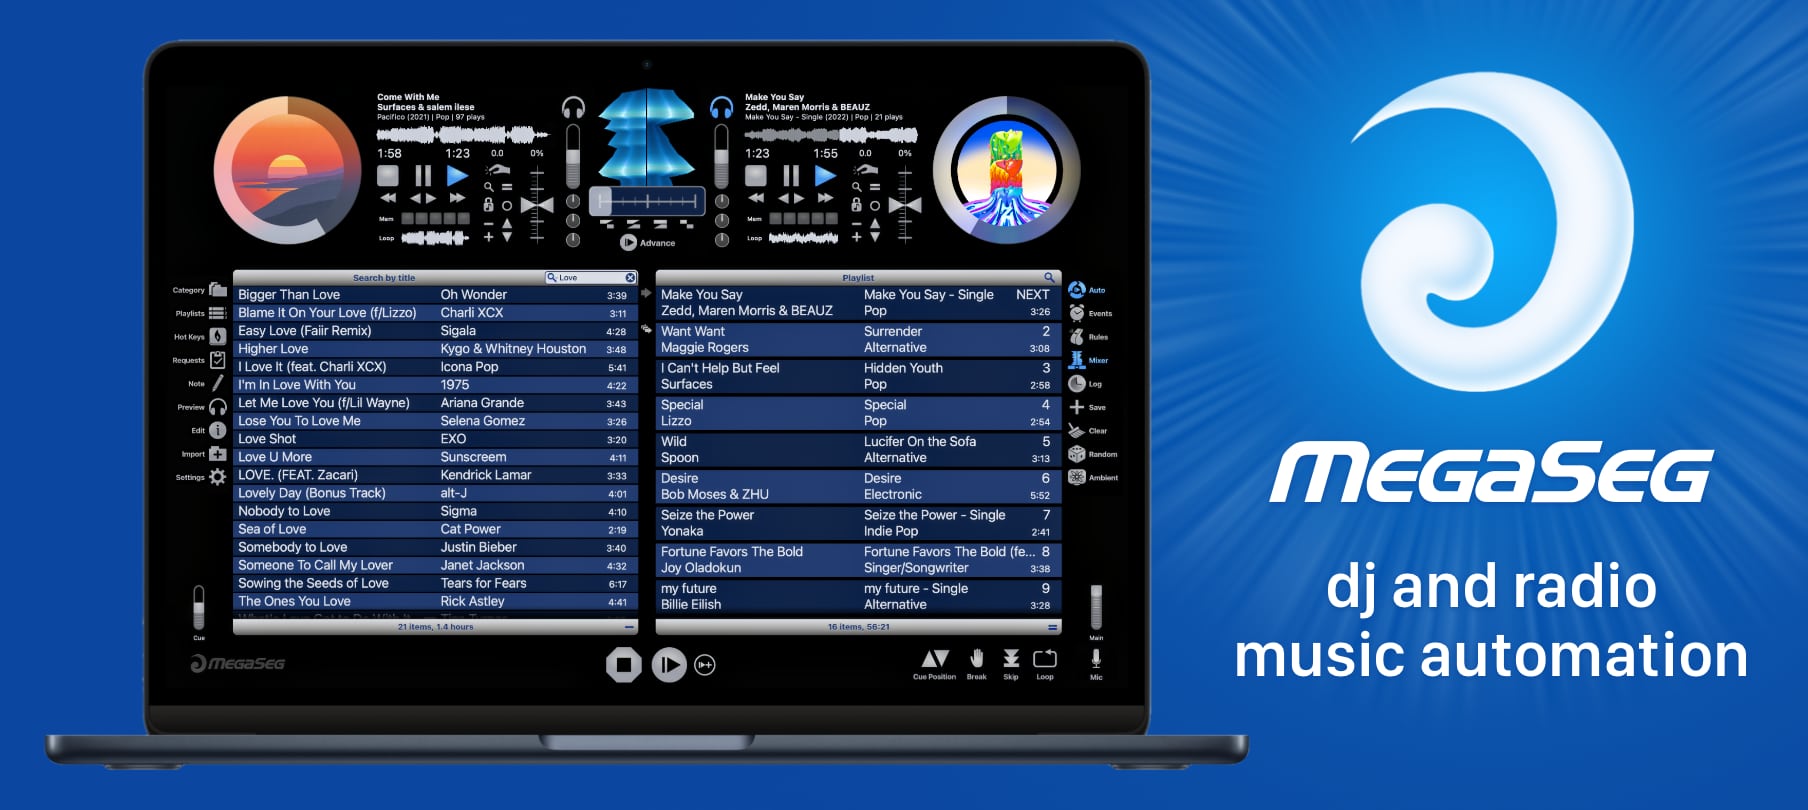 MegaSeg: Mac DJ and radio music automation playout. Featuring advanced scheduling, rules, events, requests, wave views, ambient video, and elegant library management for DJs, Radio, and Business.